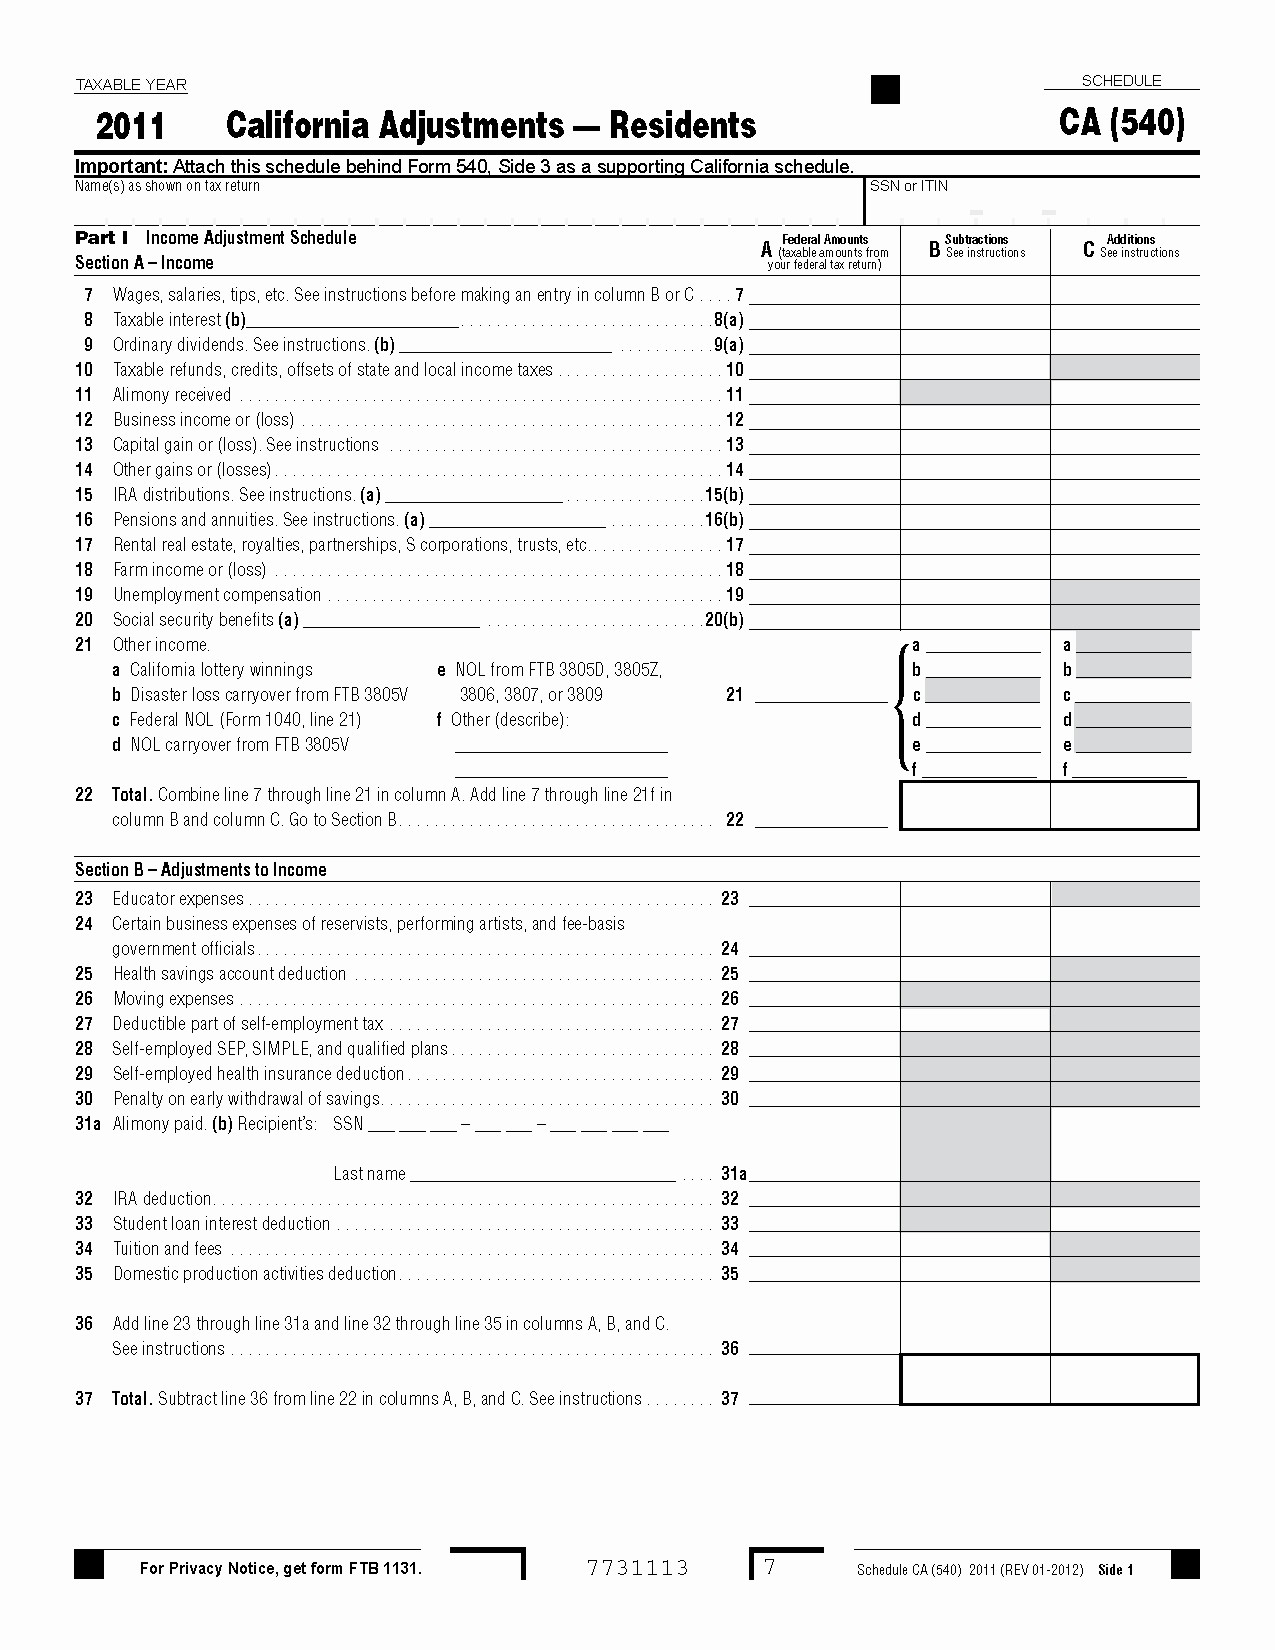 50 Awesome Irs Mileage Log Book Template DOCUMENTS IDEAS